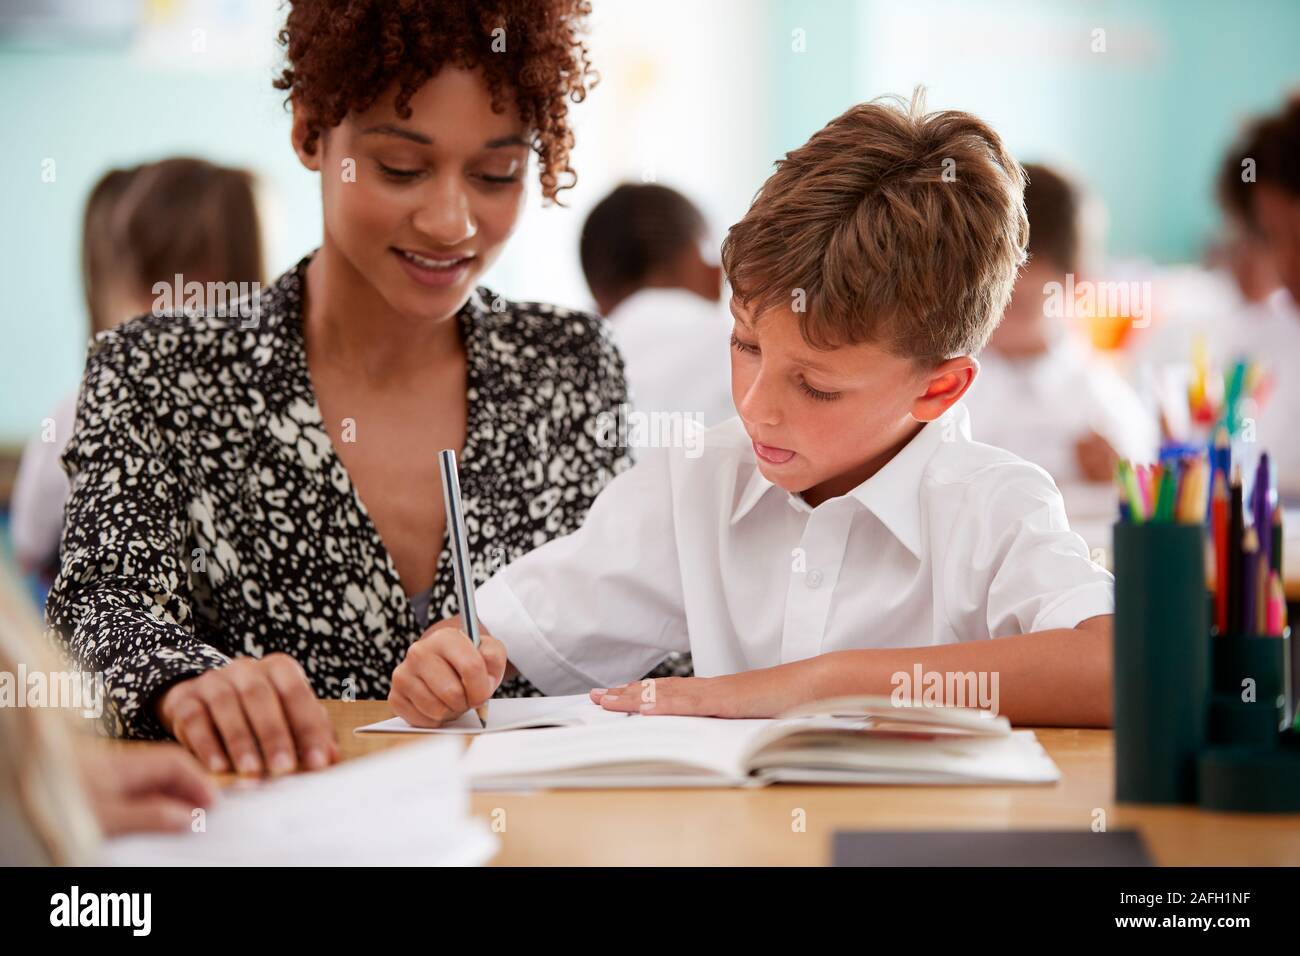 Woman Elementary School Teacher Giving Male Pupil Wearing Uniform One To One Support In Classroom Stock Photo